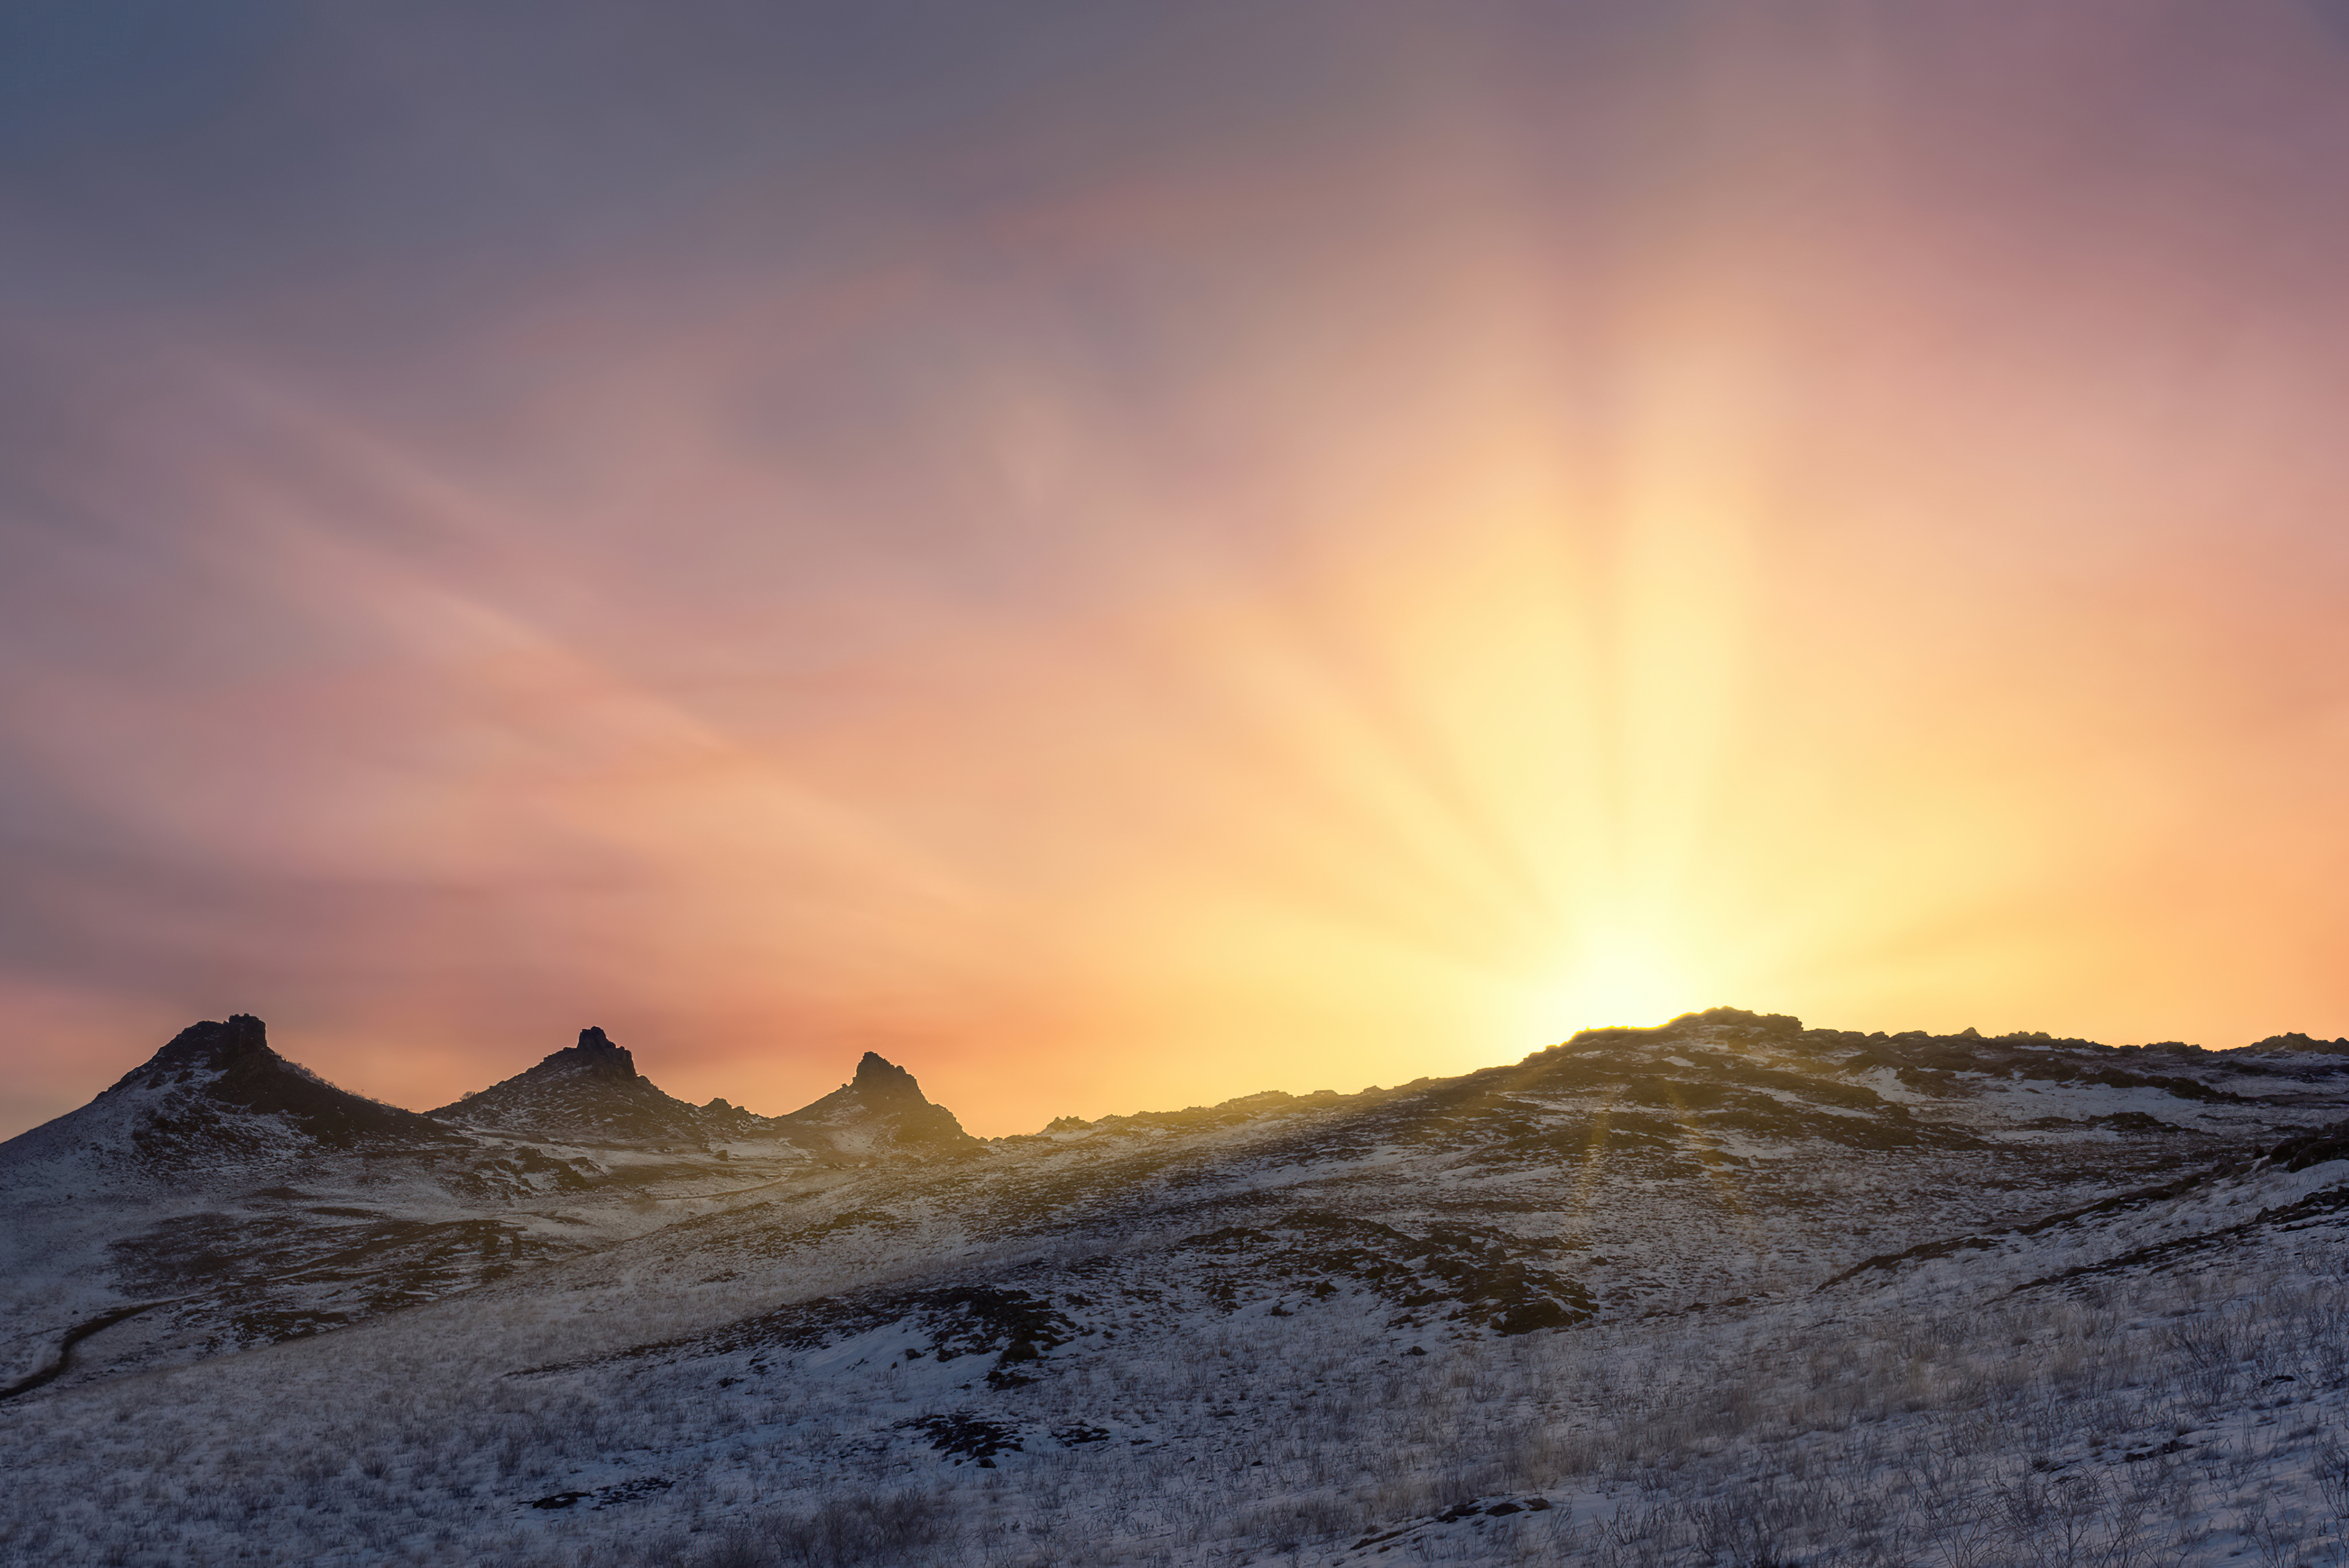 Sunrise On The Winter Mountain Wallpapers